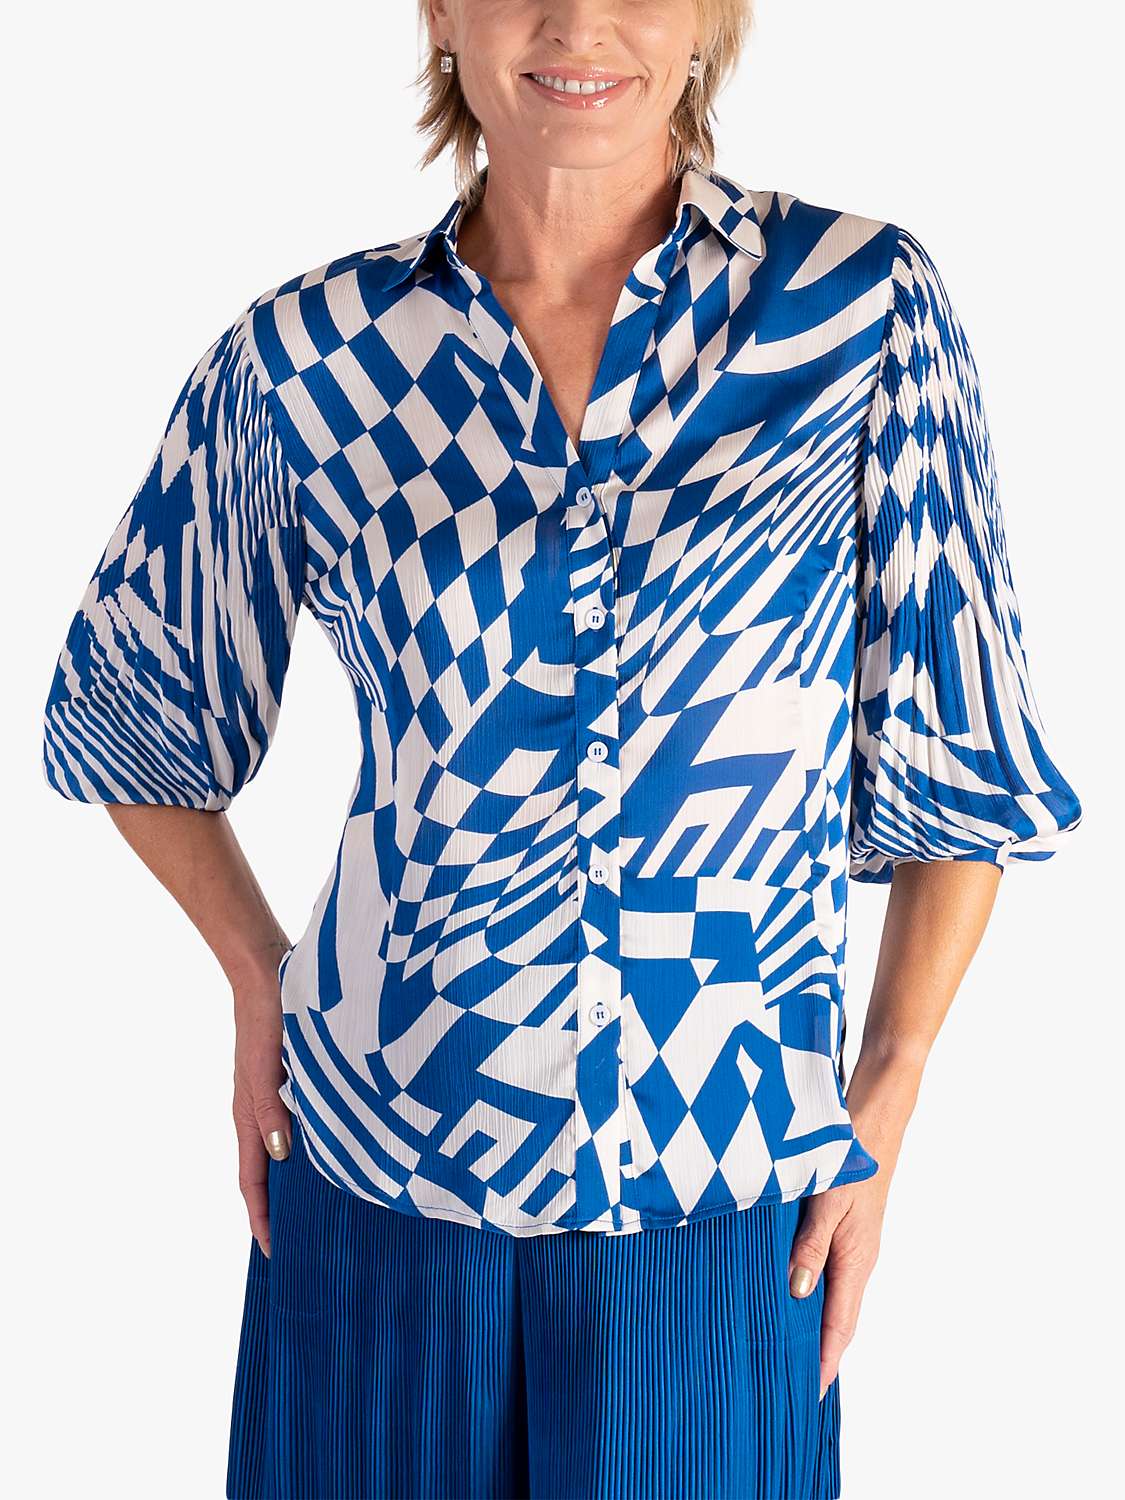 Buy chesca Abstract Geometric Swirls Shirt, Royal Blue/White Online at johnlewis.com